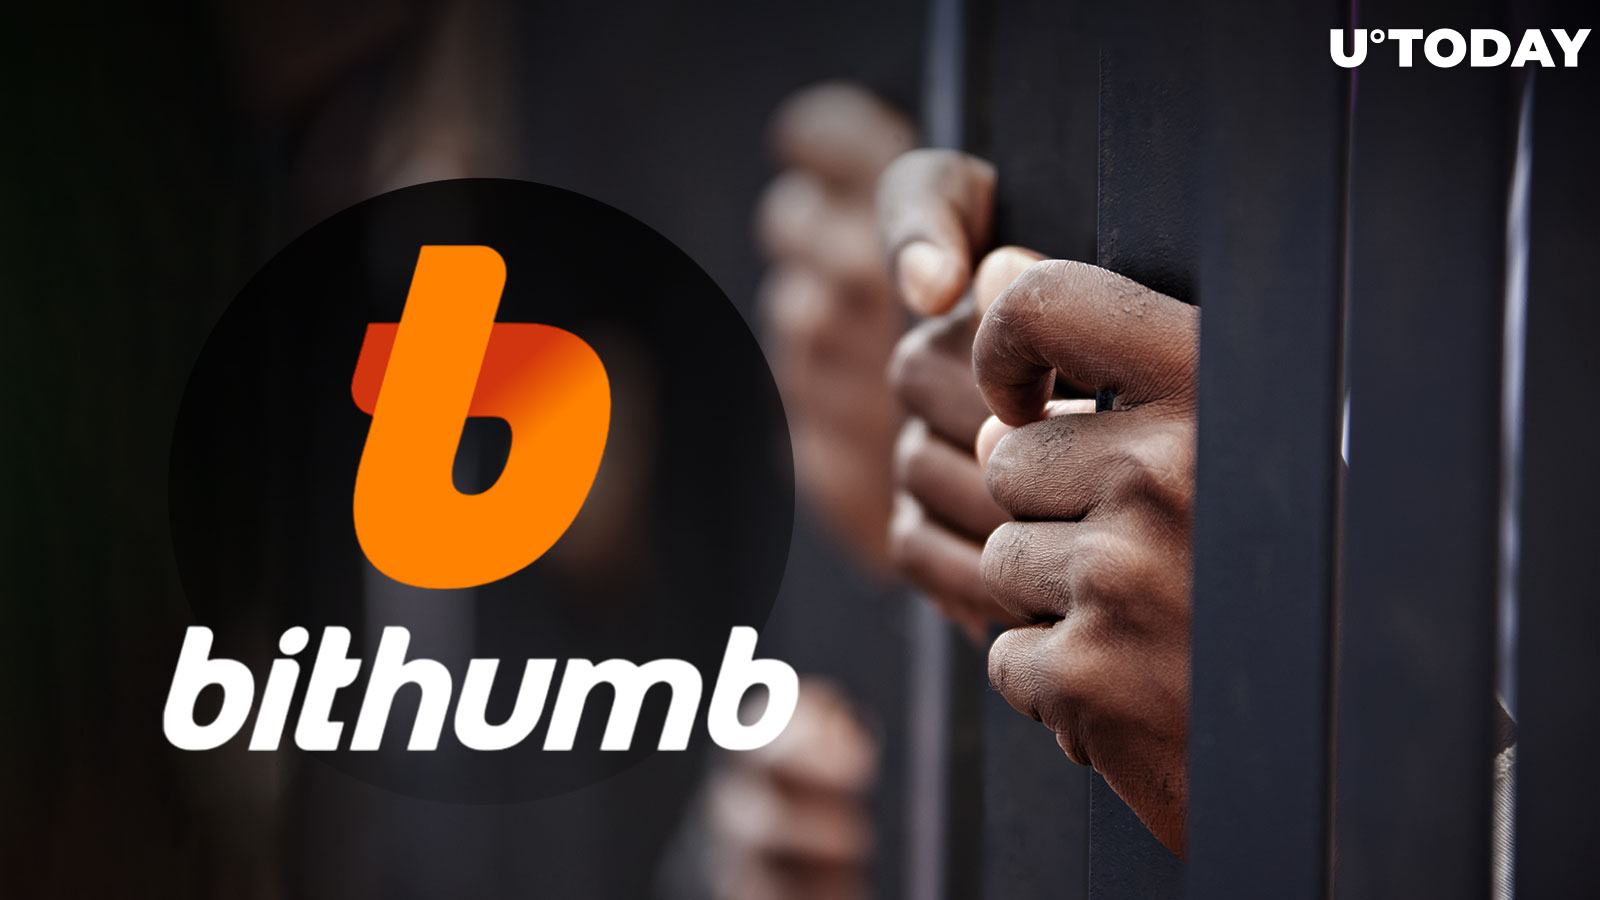 Owner of Bithumb Slapped with Arrest Warrant Request